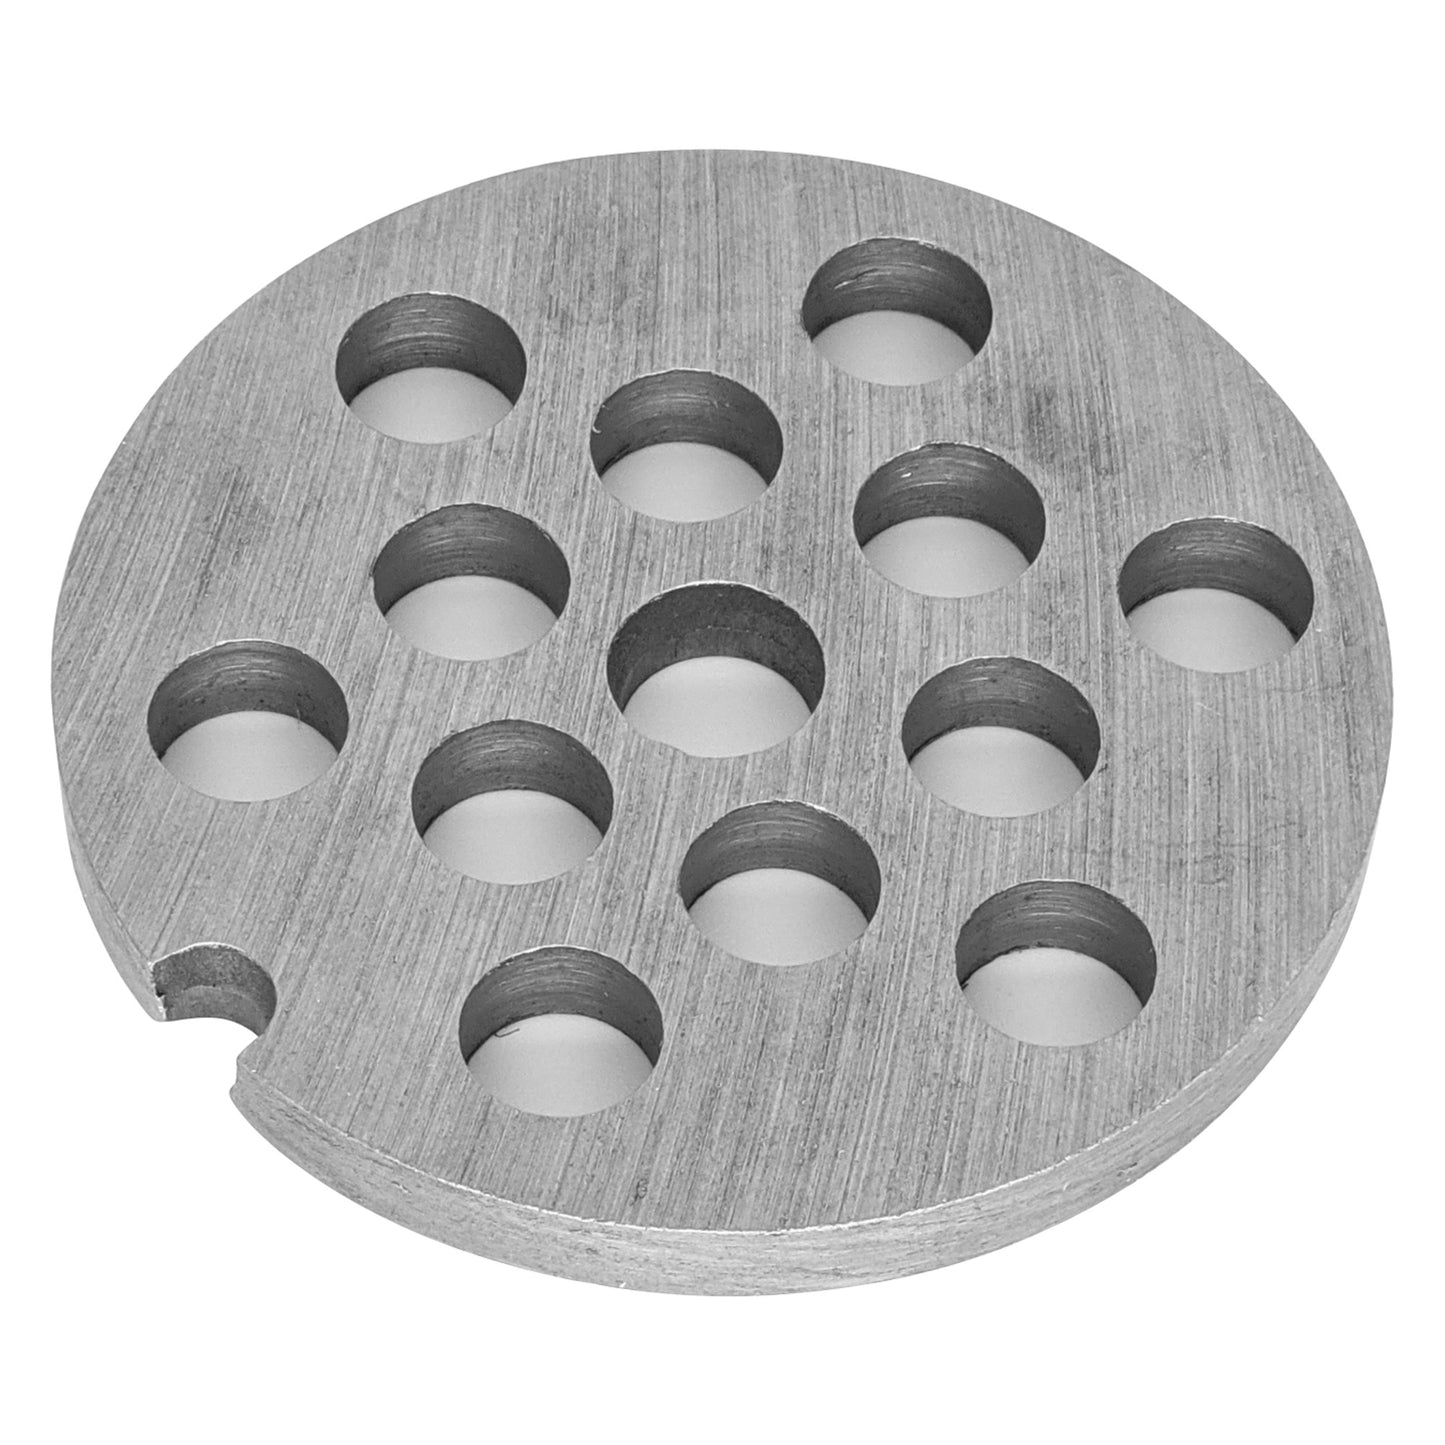 MG-1038 - Grinder Plate for MG-10 - 3/8" (10mm)